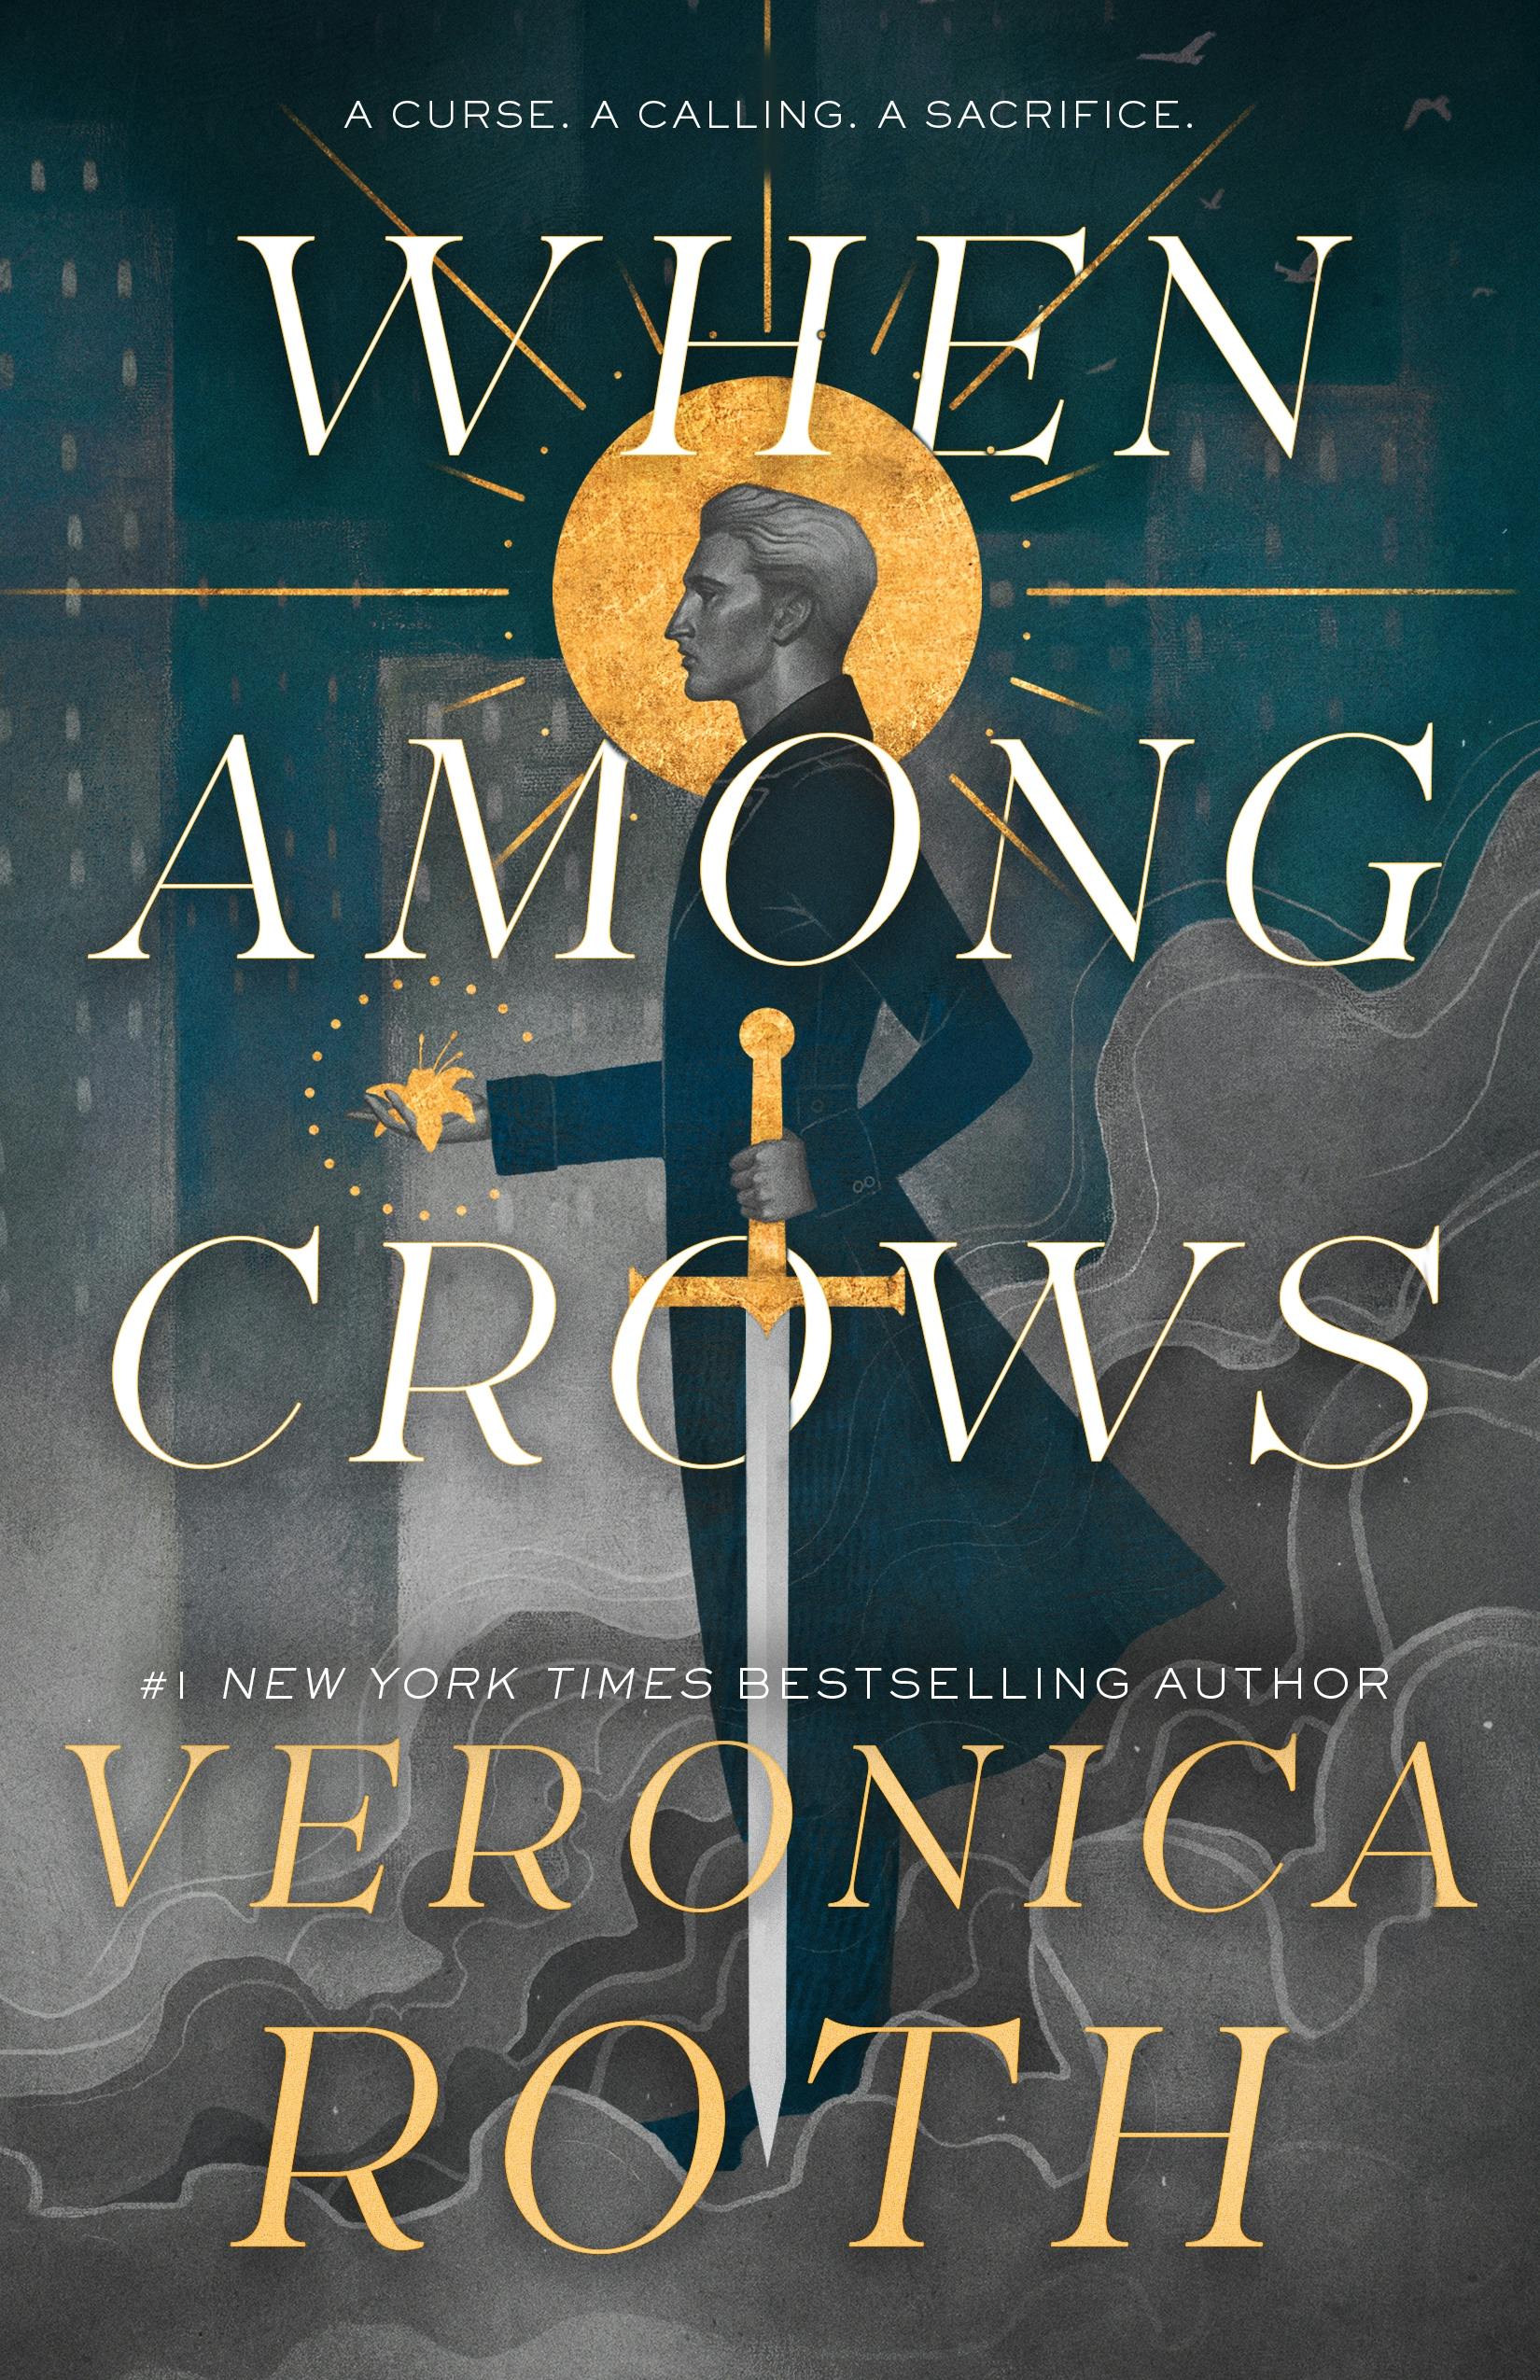 Cover for the book titled as: When Among Crows